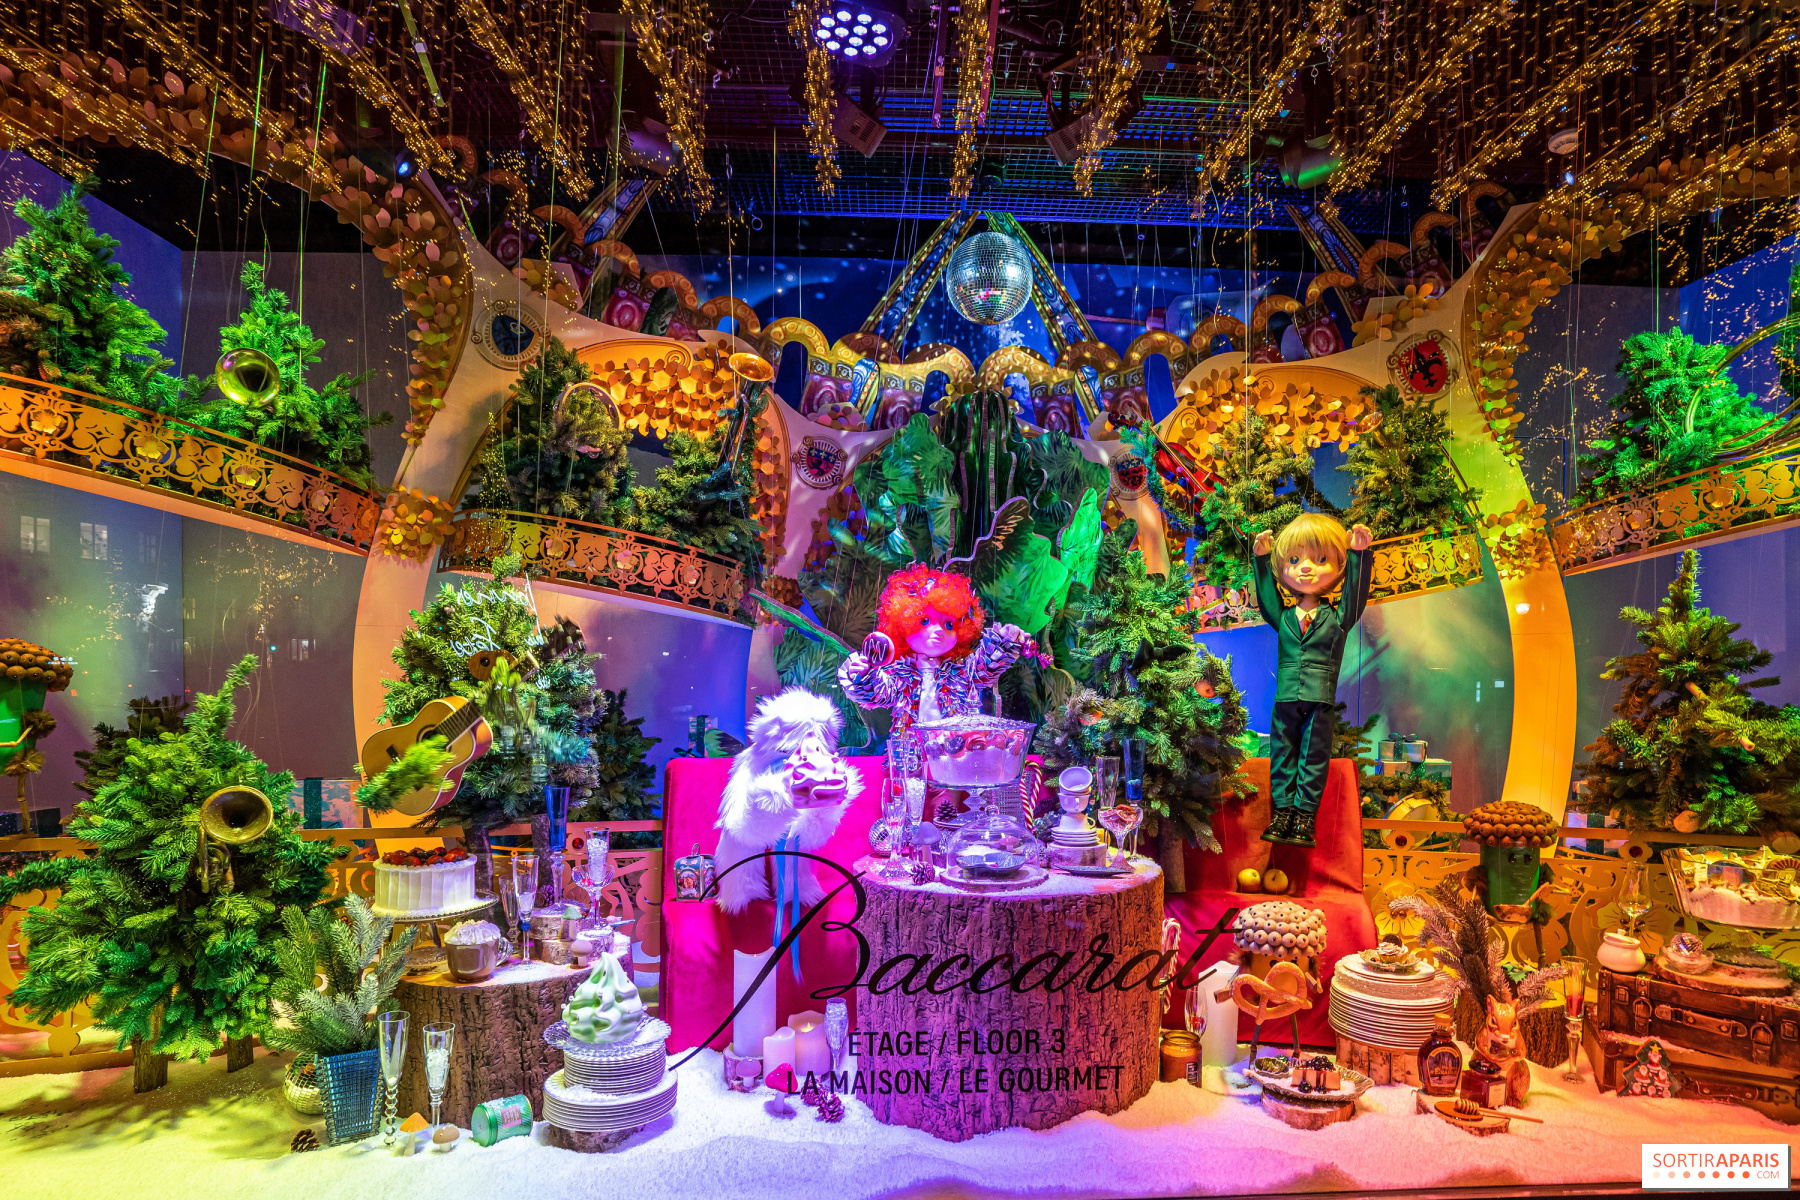 Galeries Lafayette Holiday Window Display 2012 In Collaboration